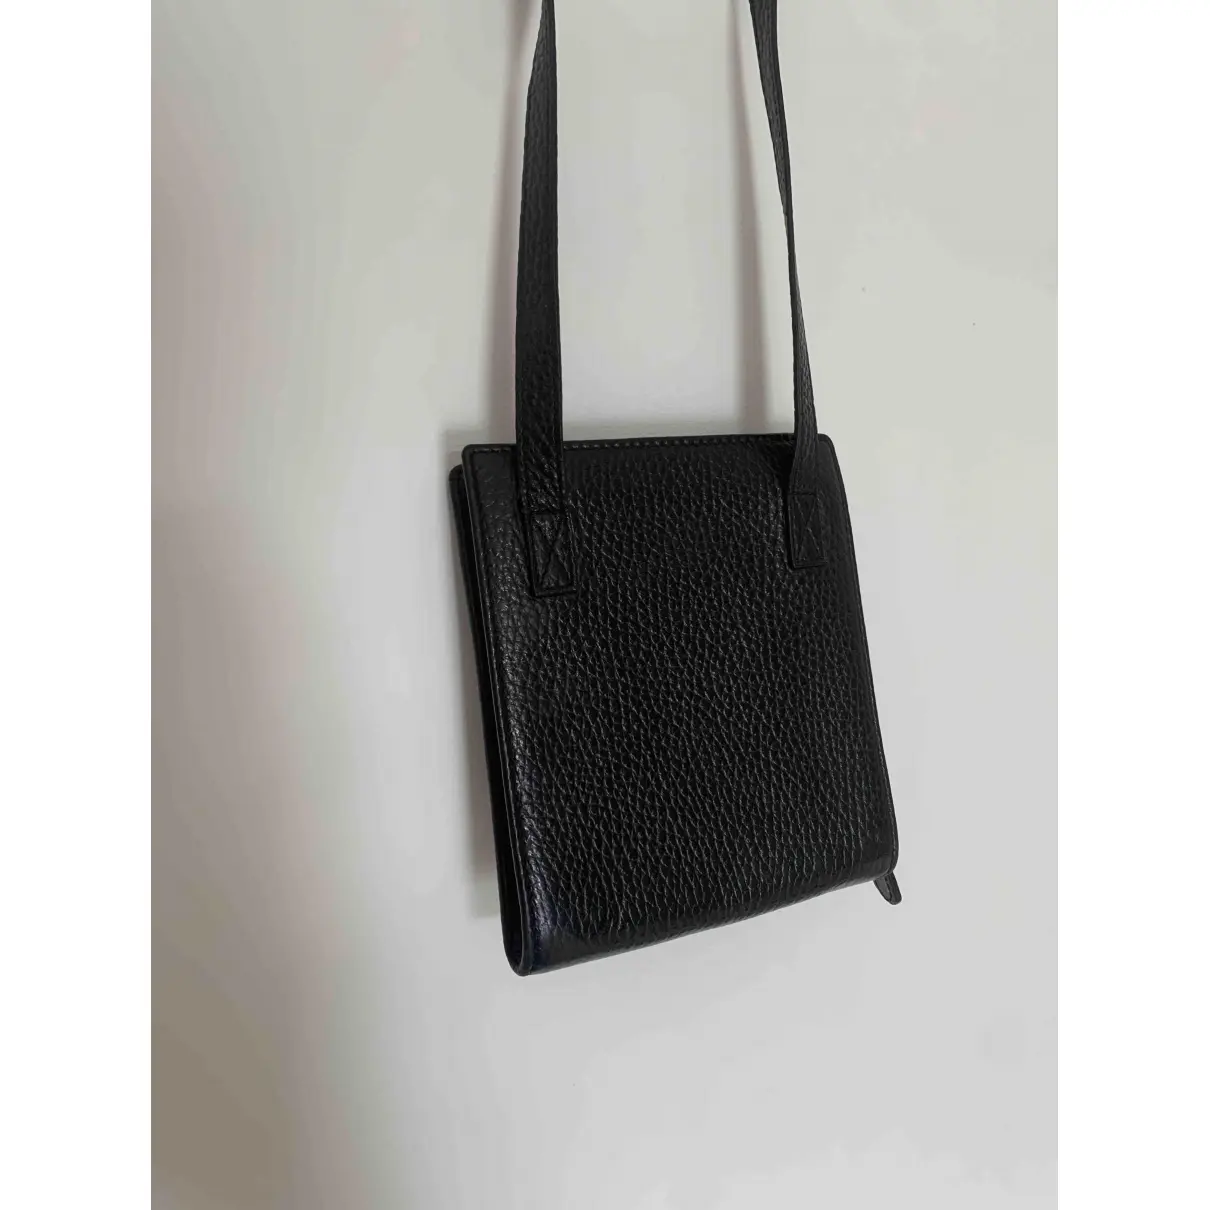 Buy Jacquemus Le Gadjo leather small bag online